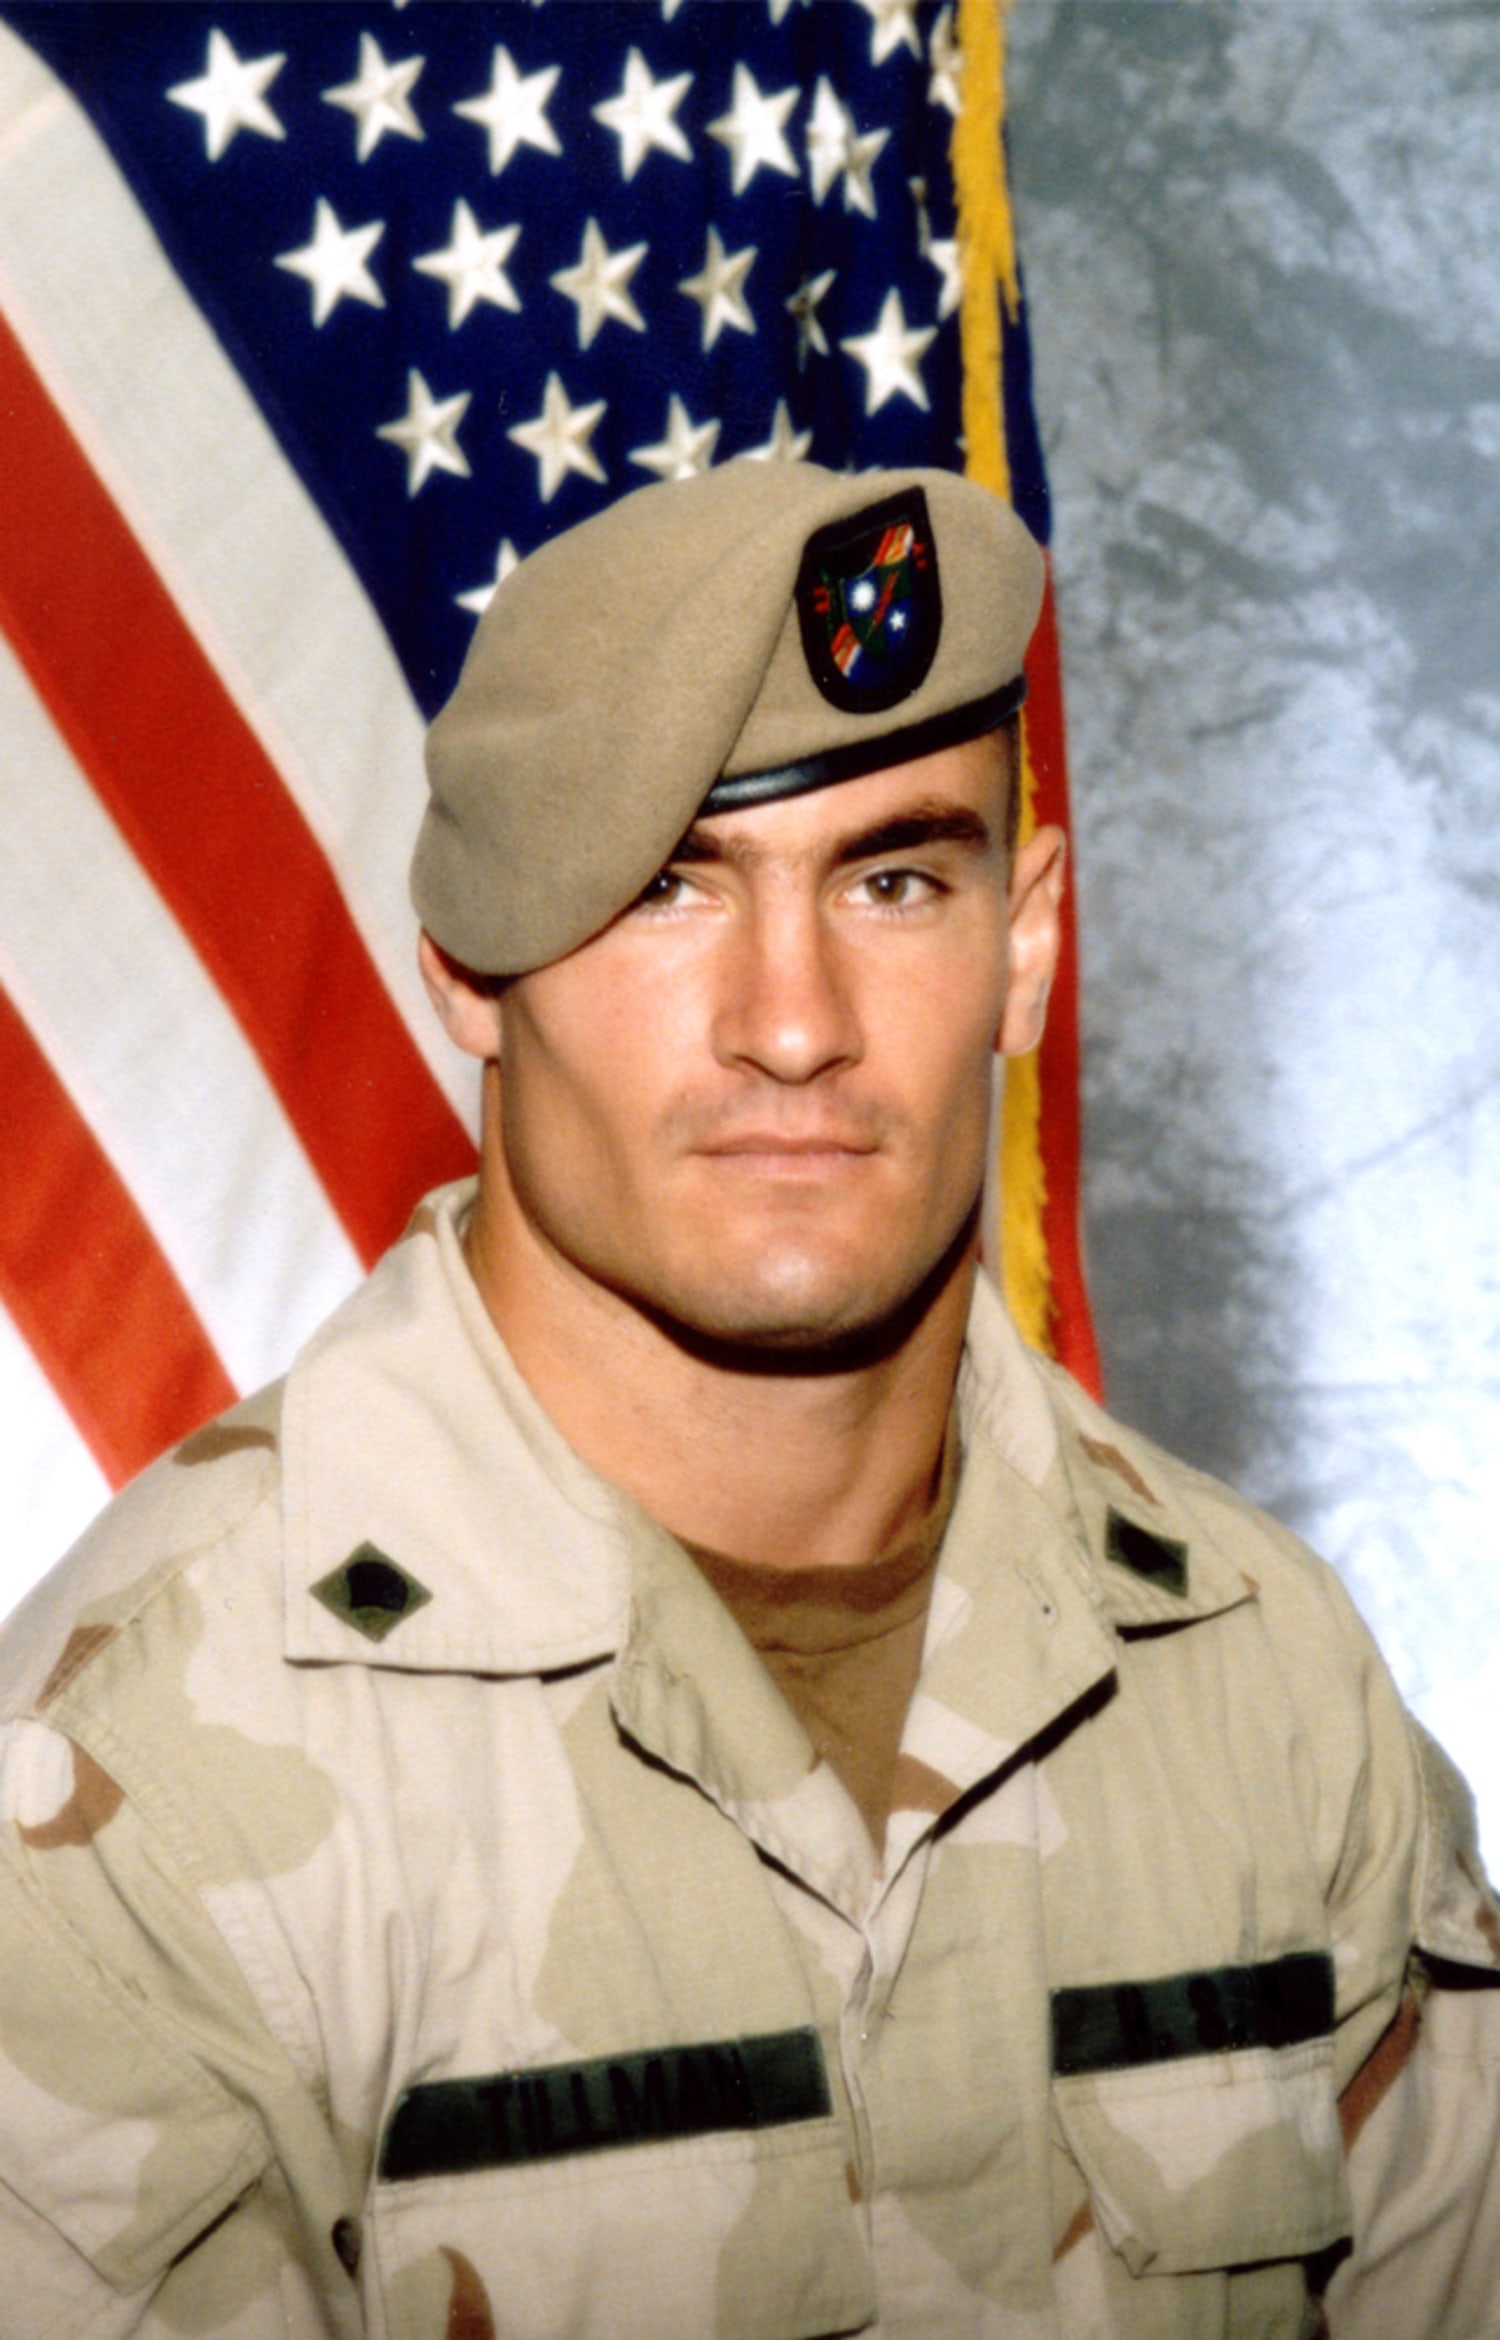 Cardinals share video of Pat Tillman talking about the American flag after  9/11 attacks